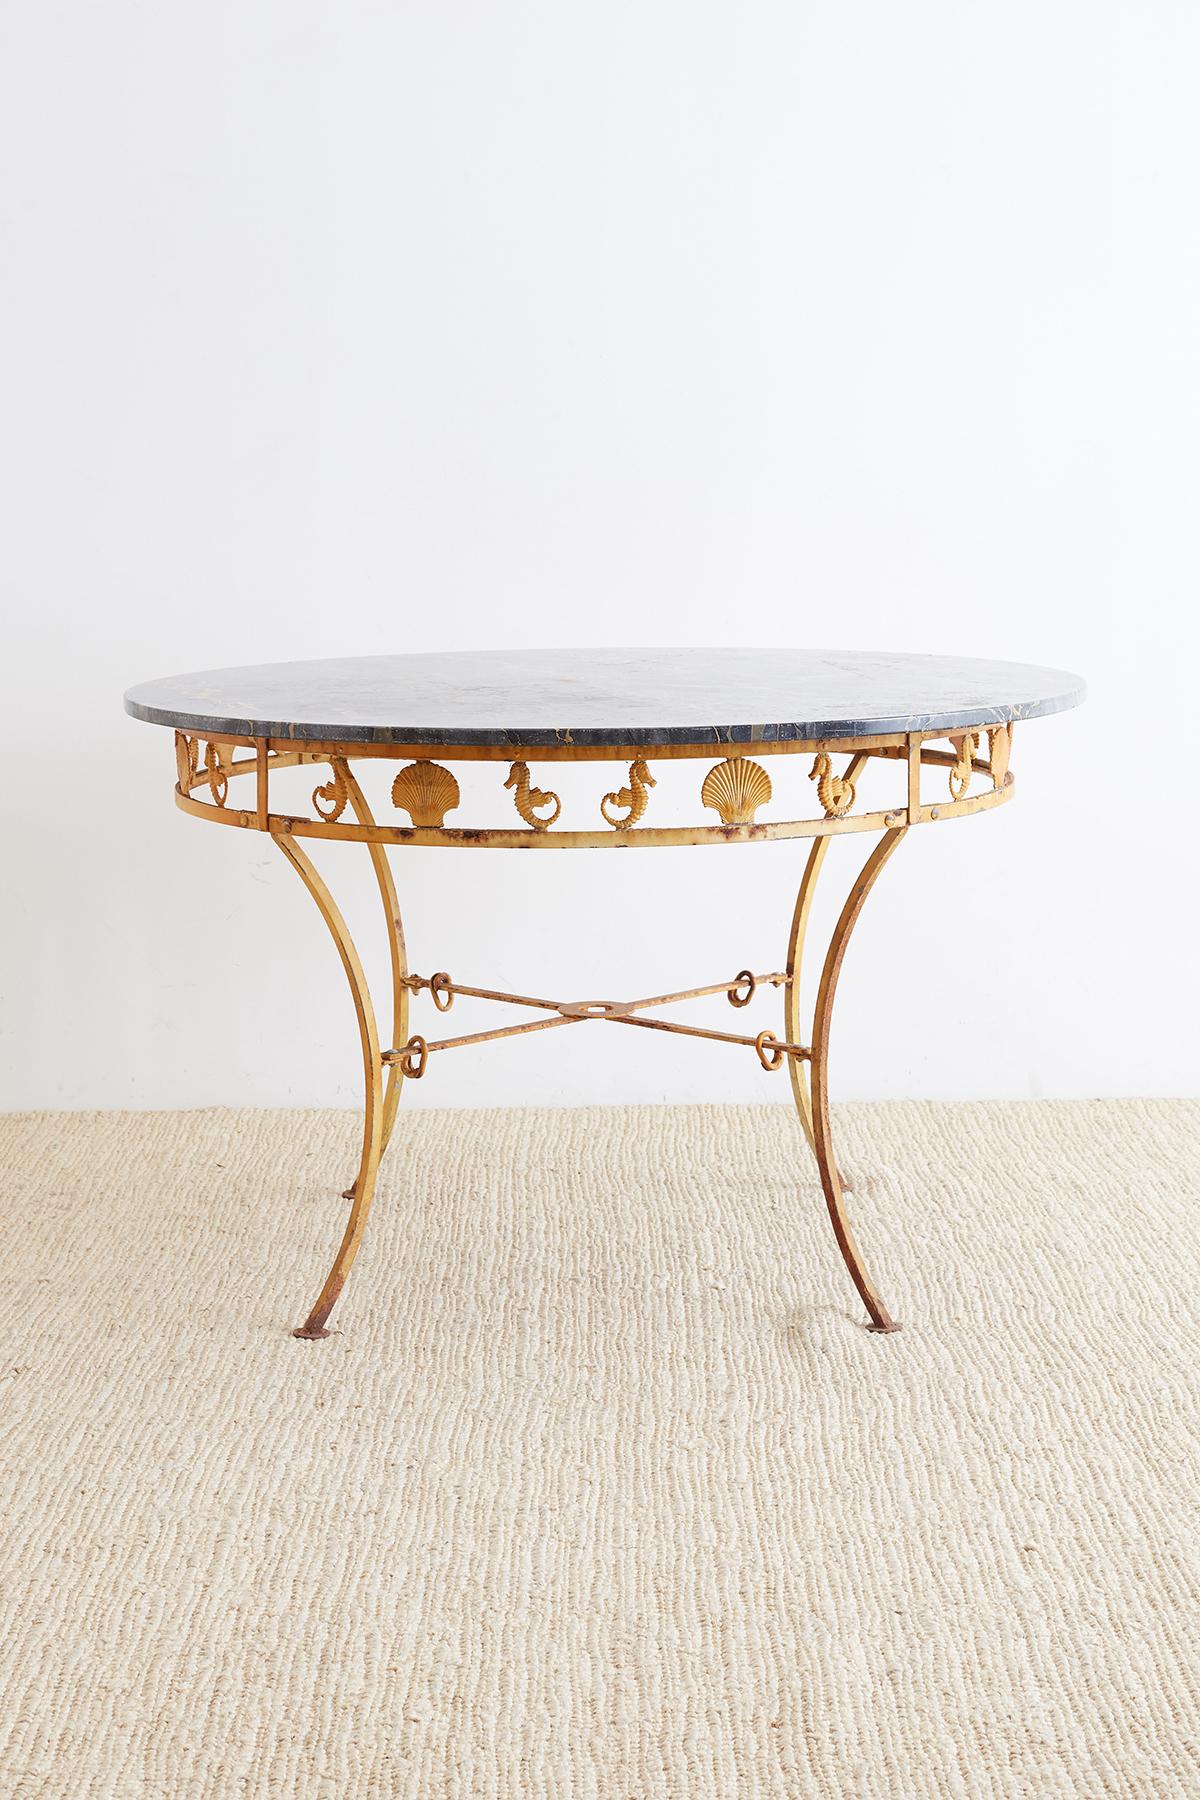 Captivating Mid-century marble garden patio dining table by Molla. Featuring a neoclassical style iron base decorated with their sea horses and shell motif design on the sides. Constructed from cast aluminium and supported by curved legs ending with